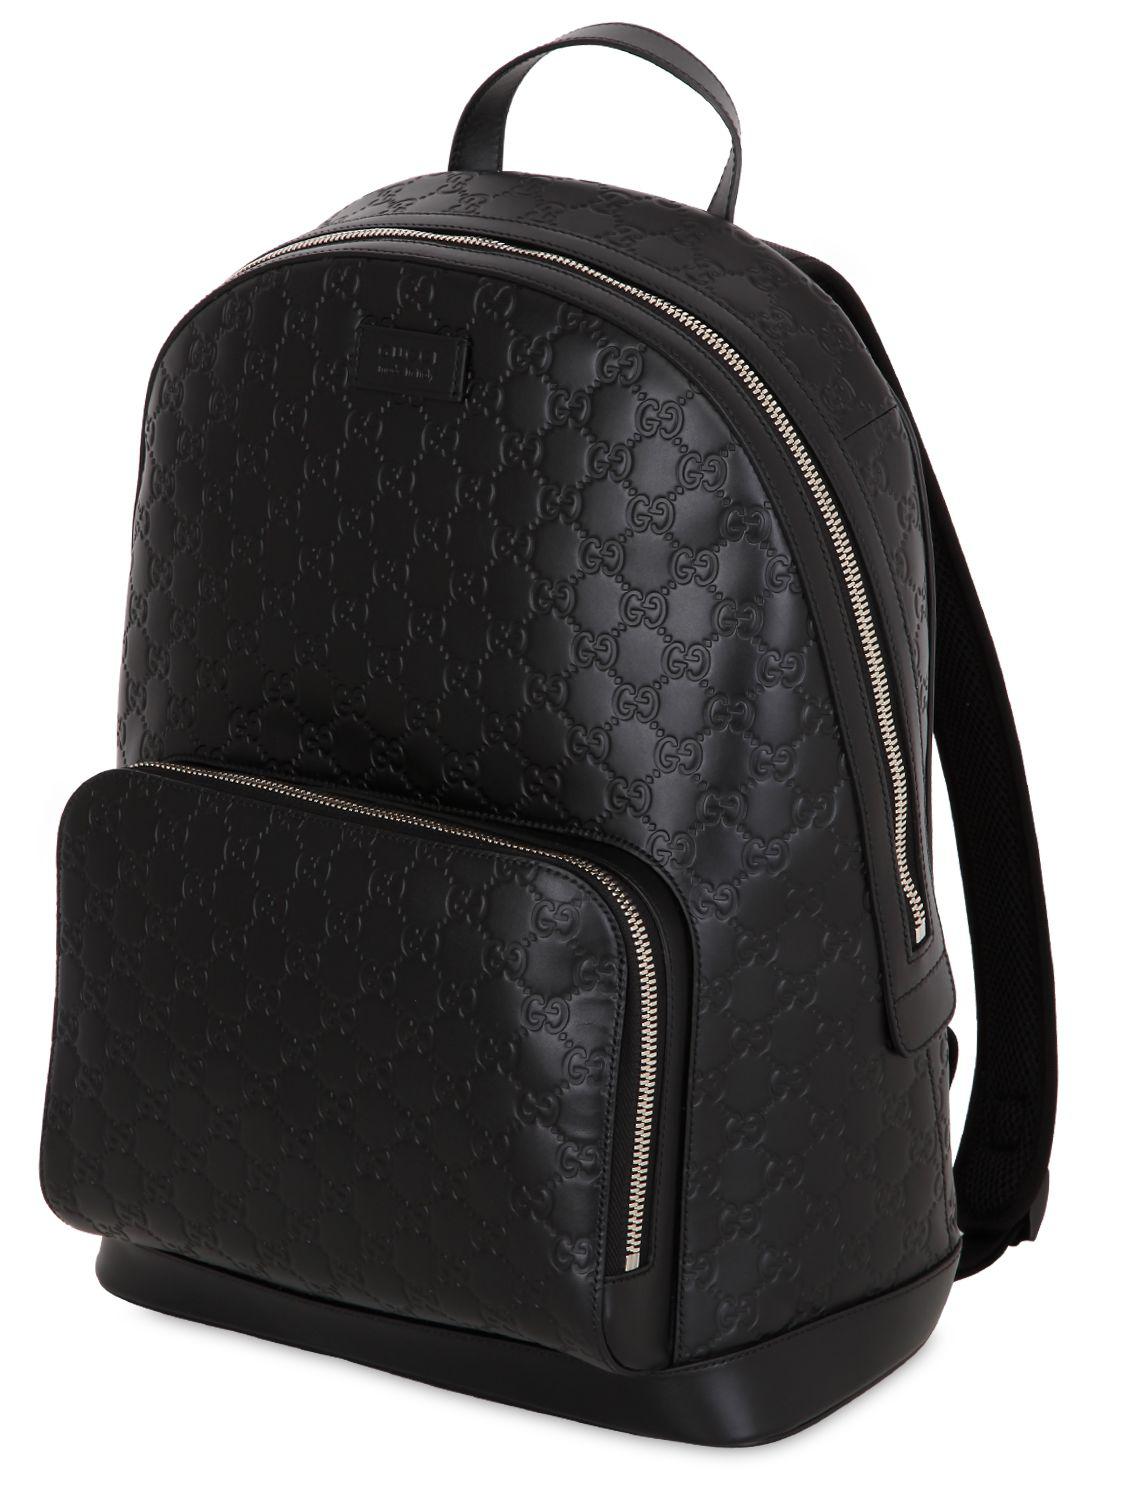 Gucci - Gucci Signature leather backpack  Leather backpack, Bags, Mens  designer backpacks